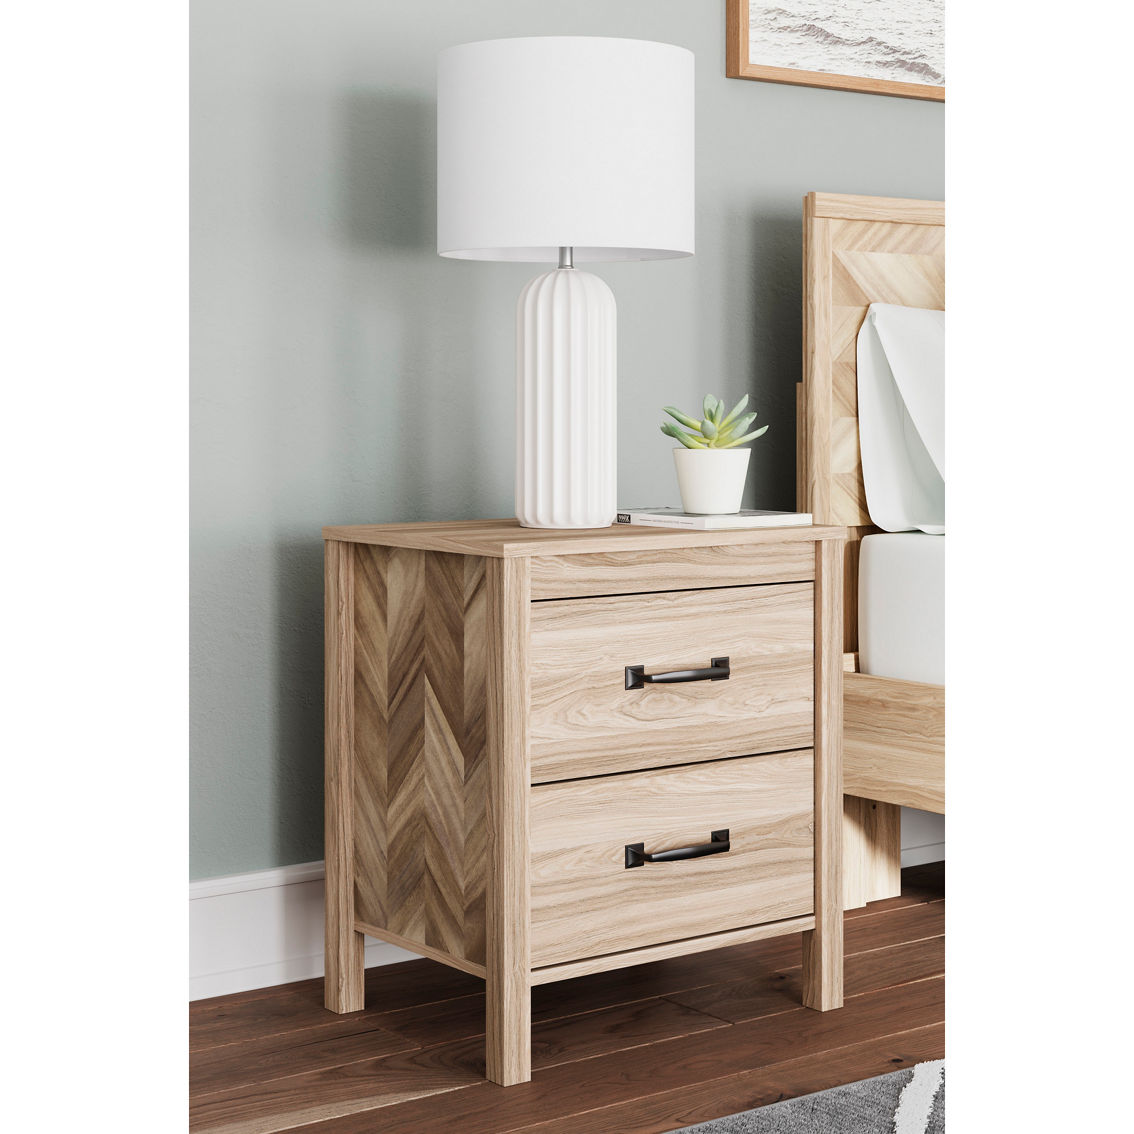 Signature Design by Ashley Battelle Ready-To-Assemble Nightstand - Image 2 of 7